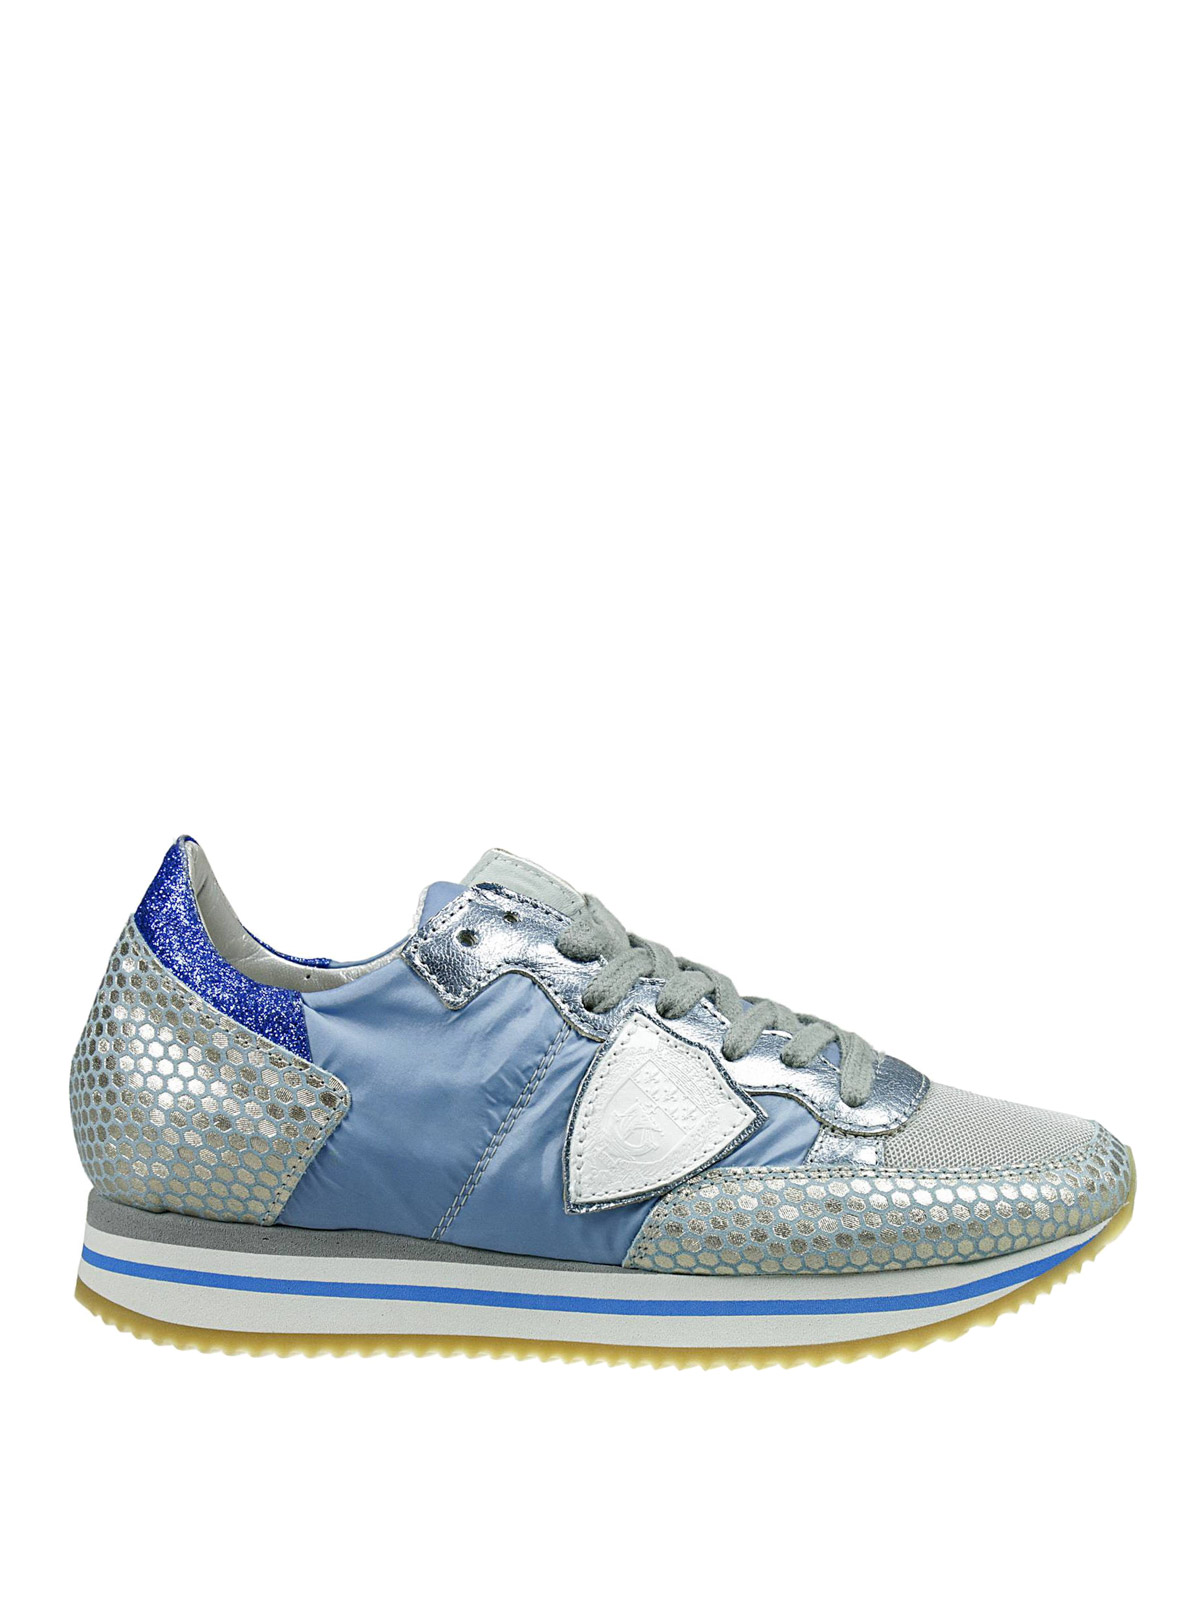 Trainers Philippe Model - Tropez pythoned sneakers - THLDJT05 | iKRIX.com